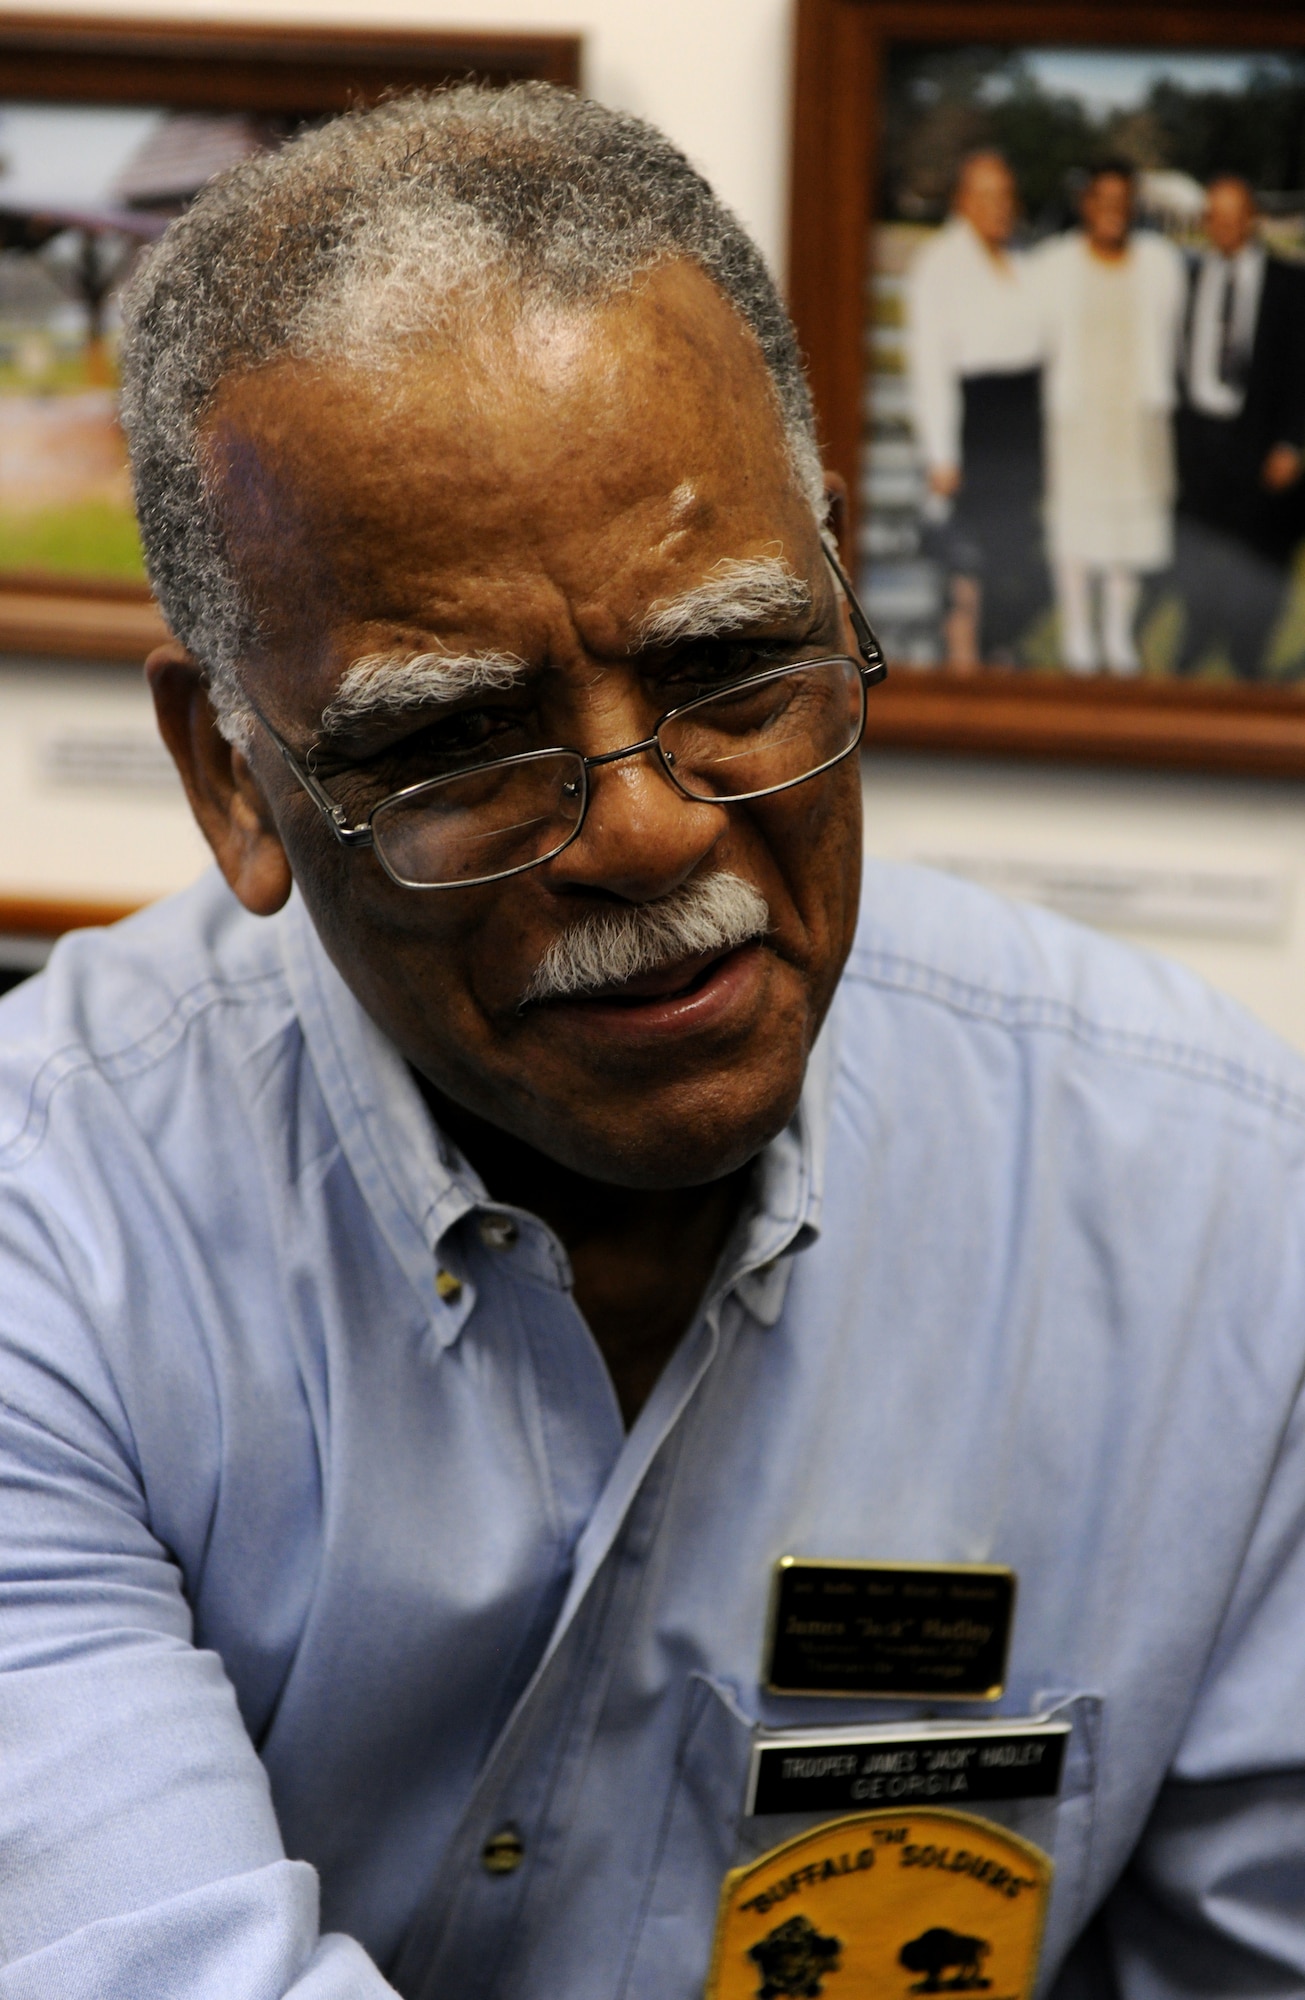 THOMASVILLE, Ga.-- Retired Chief Master Sgt. James “Jack” Hadley is currently the owner of the Jack Hadley Black History Museum. He hosts about 3,000 visitors per year at his museum and has more than 4,000 artifacts, documents and pictures depicting African-American history to show visitors. (U.S. Air Force photo/Airman 1st Class Benjamin Wiseman)(RELEASED)